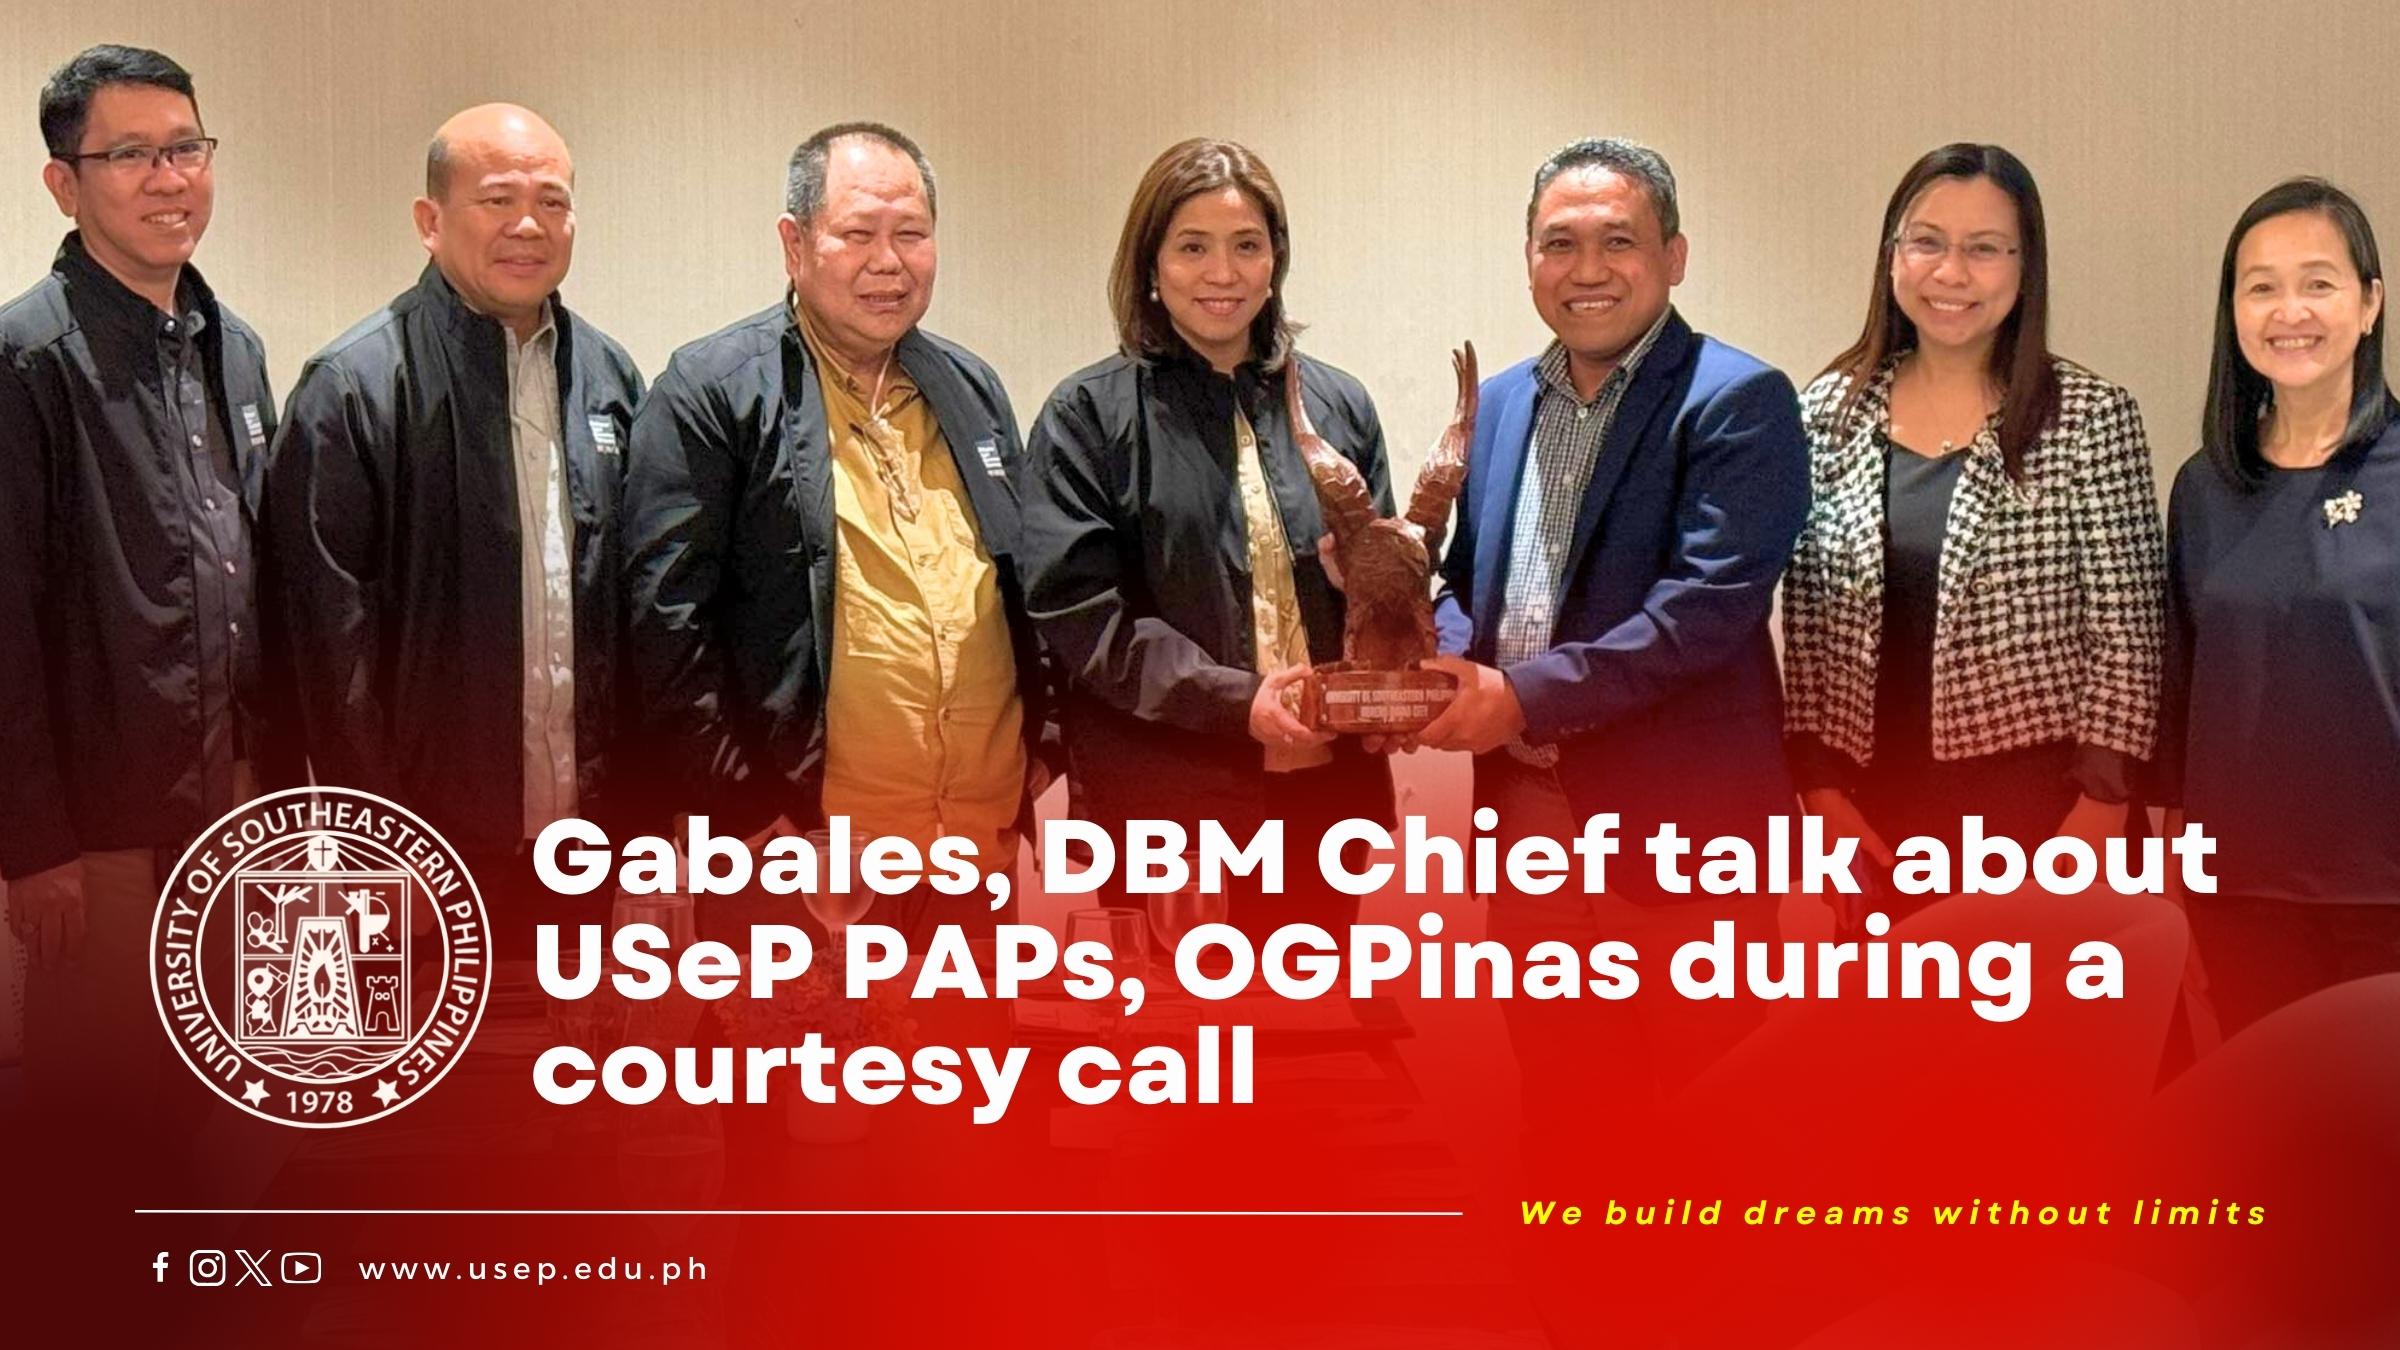 Gabales, DBM Chief talk about USeP PAPs, OGPinas during a courtesy call